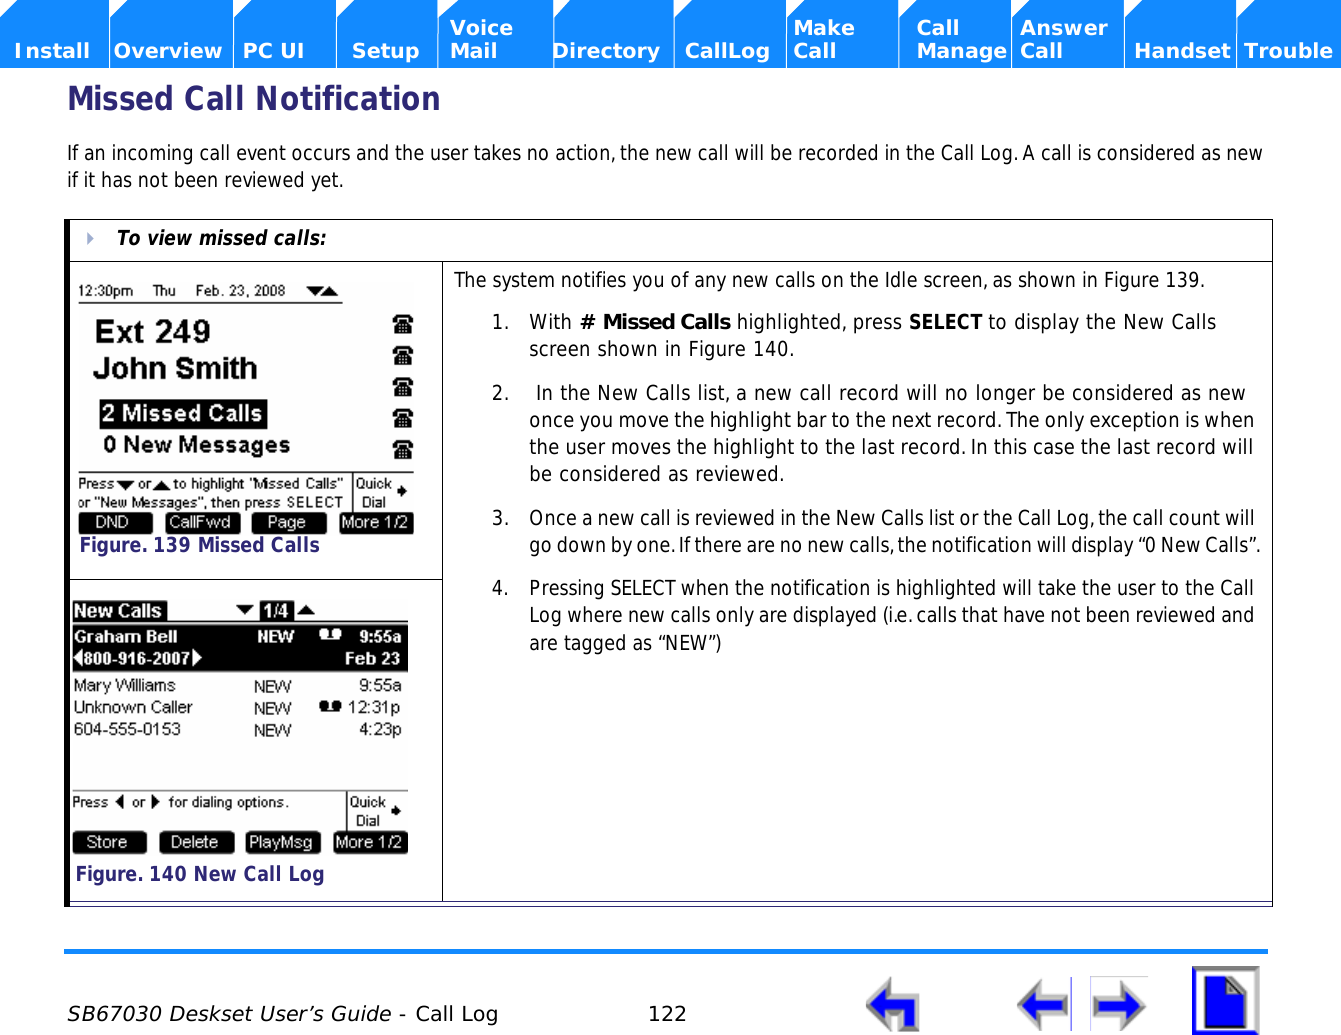  SB67030 Deskset User’s Guide - Call Log 122    Voice Make Call Answer  Install Overview PC UI Setup Mail Directory CallLog Call Manage Call Handset TroubleMissed Call NotificationIf an incoming call event occurs and the user takes no action, the new call will be recorded in the Call Log. A call is considered as new if it has not been reviewed yet.To view missed calls:The system notifies you of any new calls on the Idle screen, as shown in Figure 139.1. With # Missed Calls highlighted, press SELECT to display the New Calls screen shown in Figure 140.2.  In the New Calls list, a new call record will no longer be considered as new once you move the highlight bar to the next record. The only exception is when the user moves the highlight to the last record. In this case the last record will be considered as reviewed.3. Once a new call is reviewed in the New Calls list or the Call Log, the call count will go down by one. If there are no new calls, the notification will display “0 New Calls”.4. Pressing SELECT when the notification is highlighted will take the user to the Call Log where new calls only are displayed (i.e. calls that have not been reviewed and are tagged as “NEW”)Figure. 139 Missed CallsFigure. 140 New Call Log